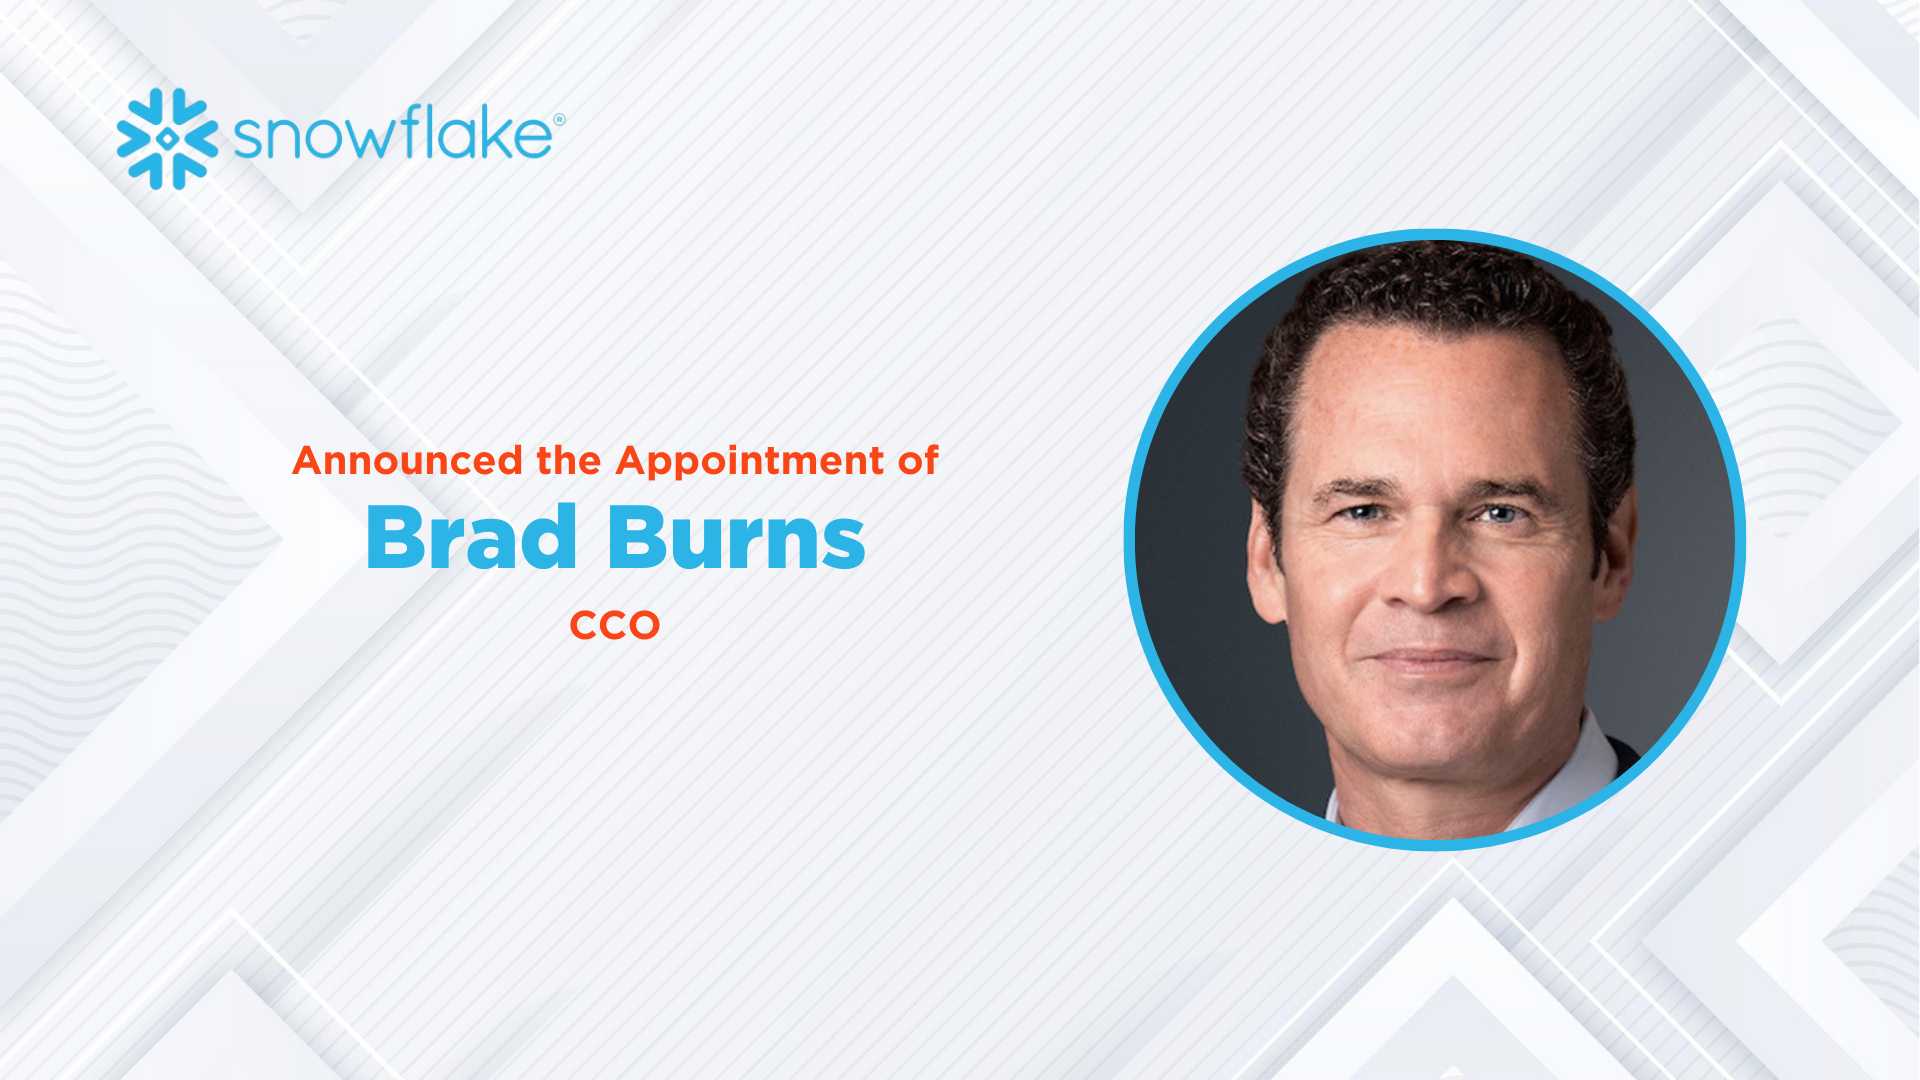 Snowflake Appoints Brad Burns as Chief Communications Officer